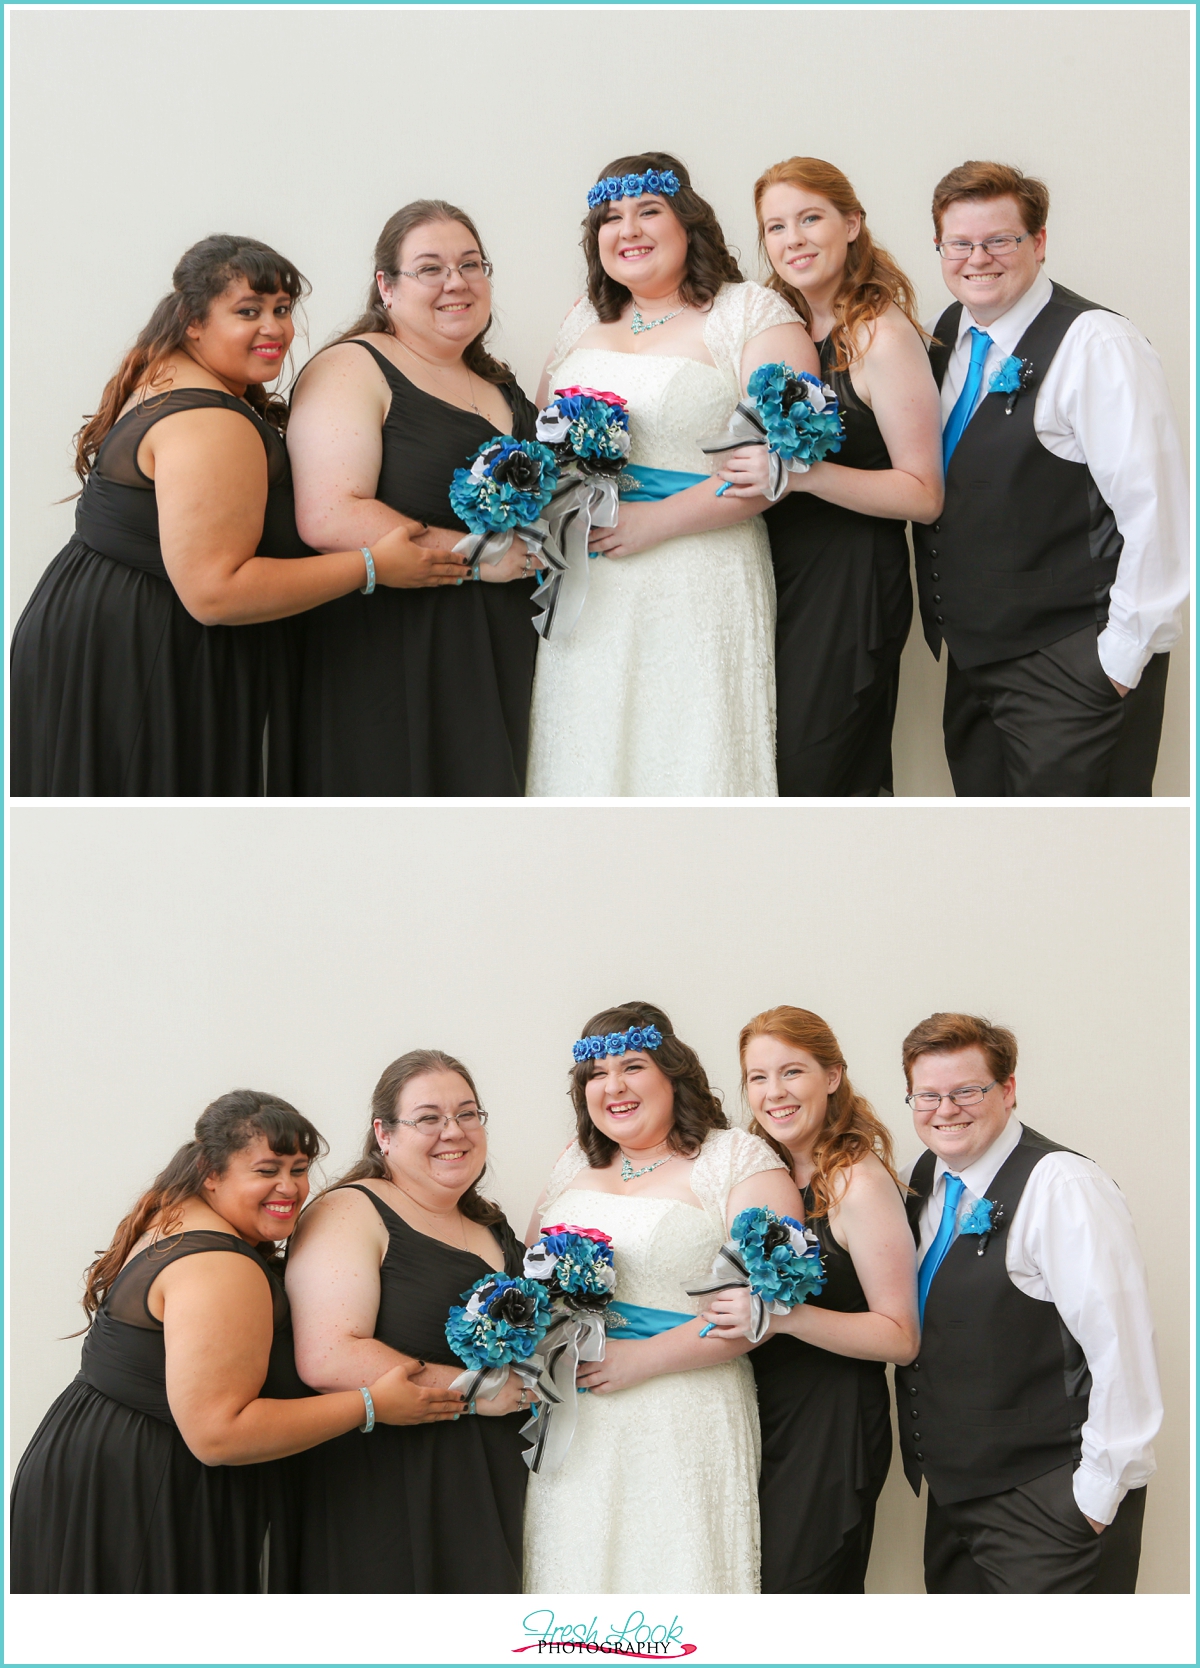 teal and gray wedding colors